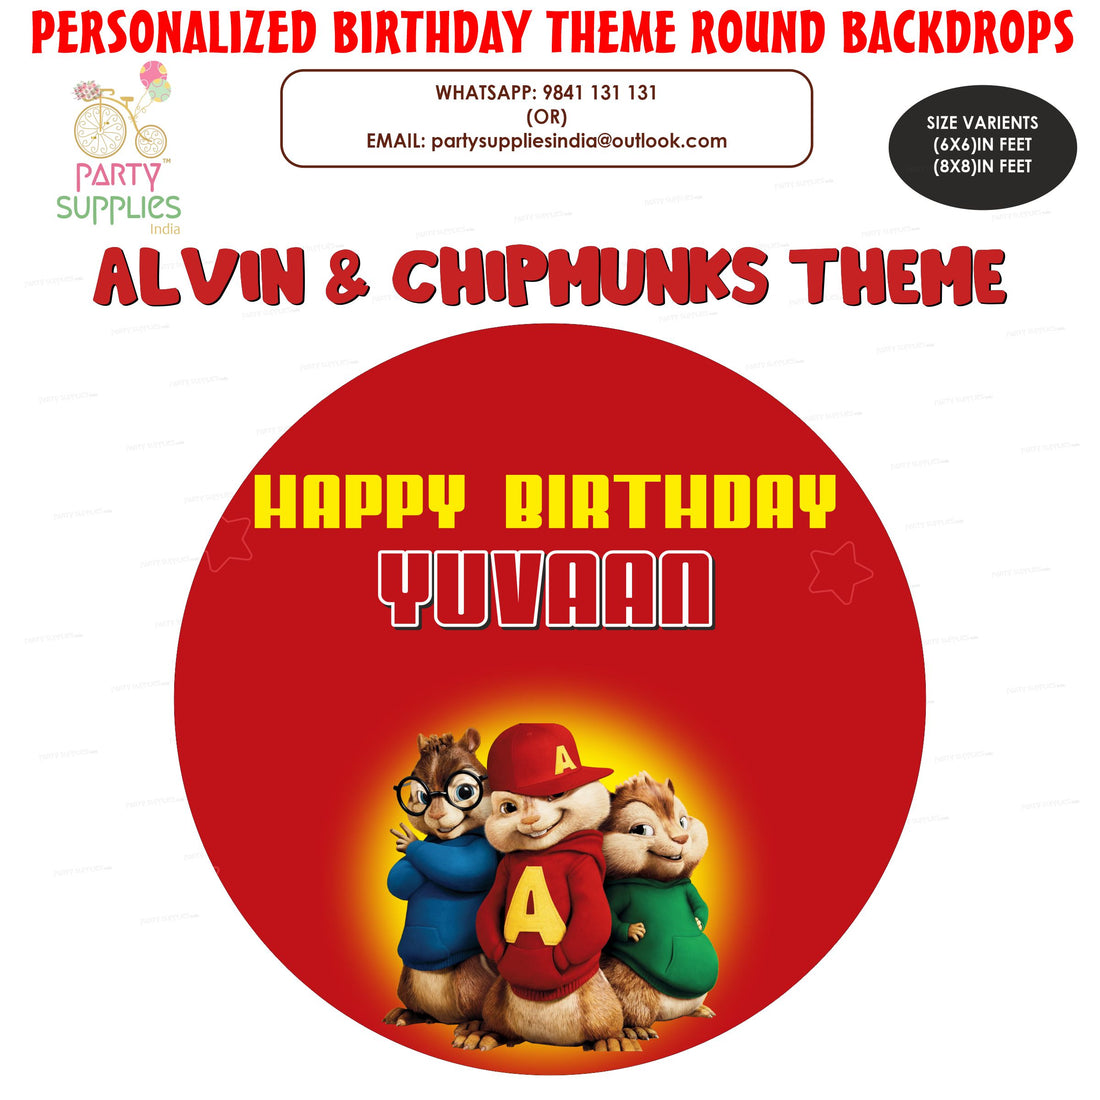 PSI Alvin and Chipmunks Theme Personalized Round Backdrop